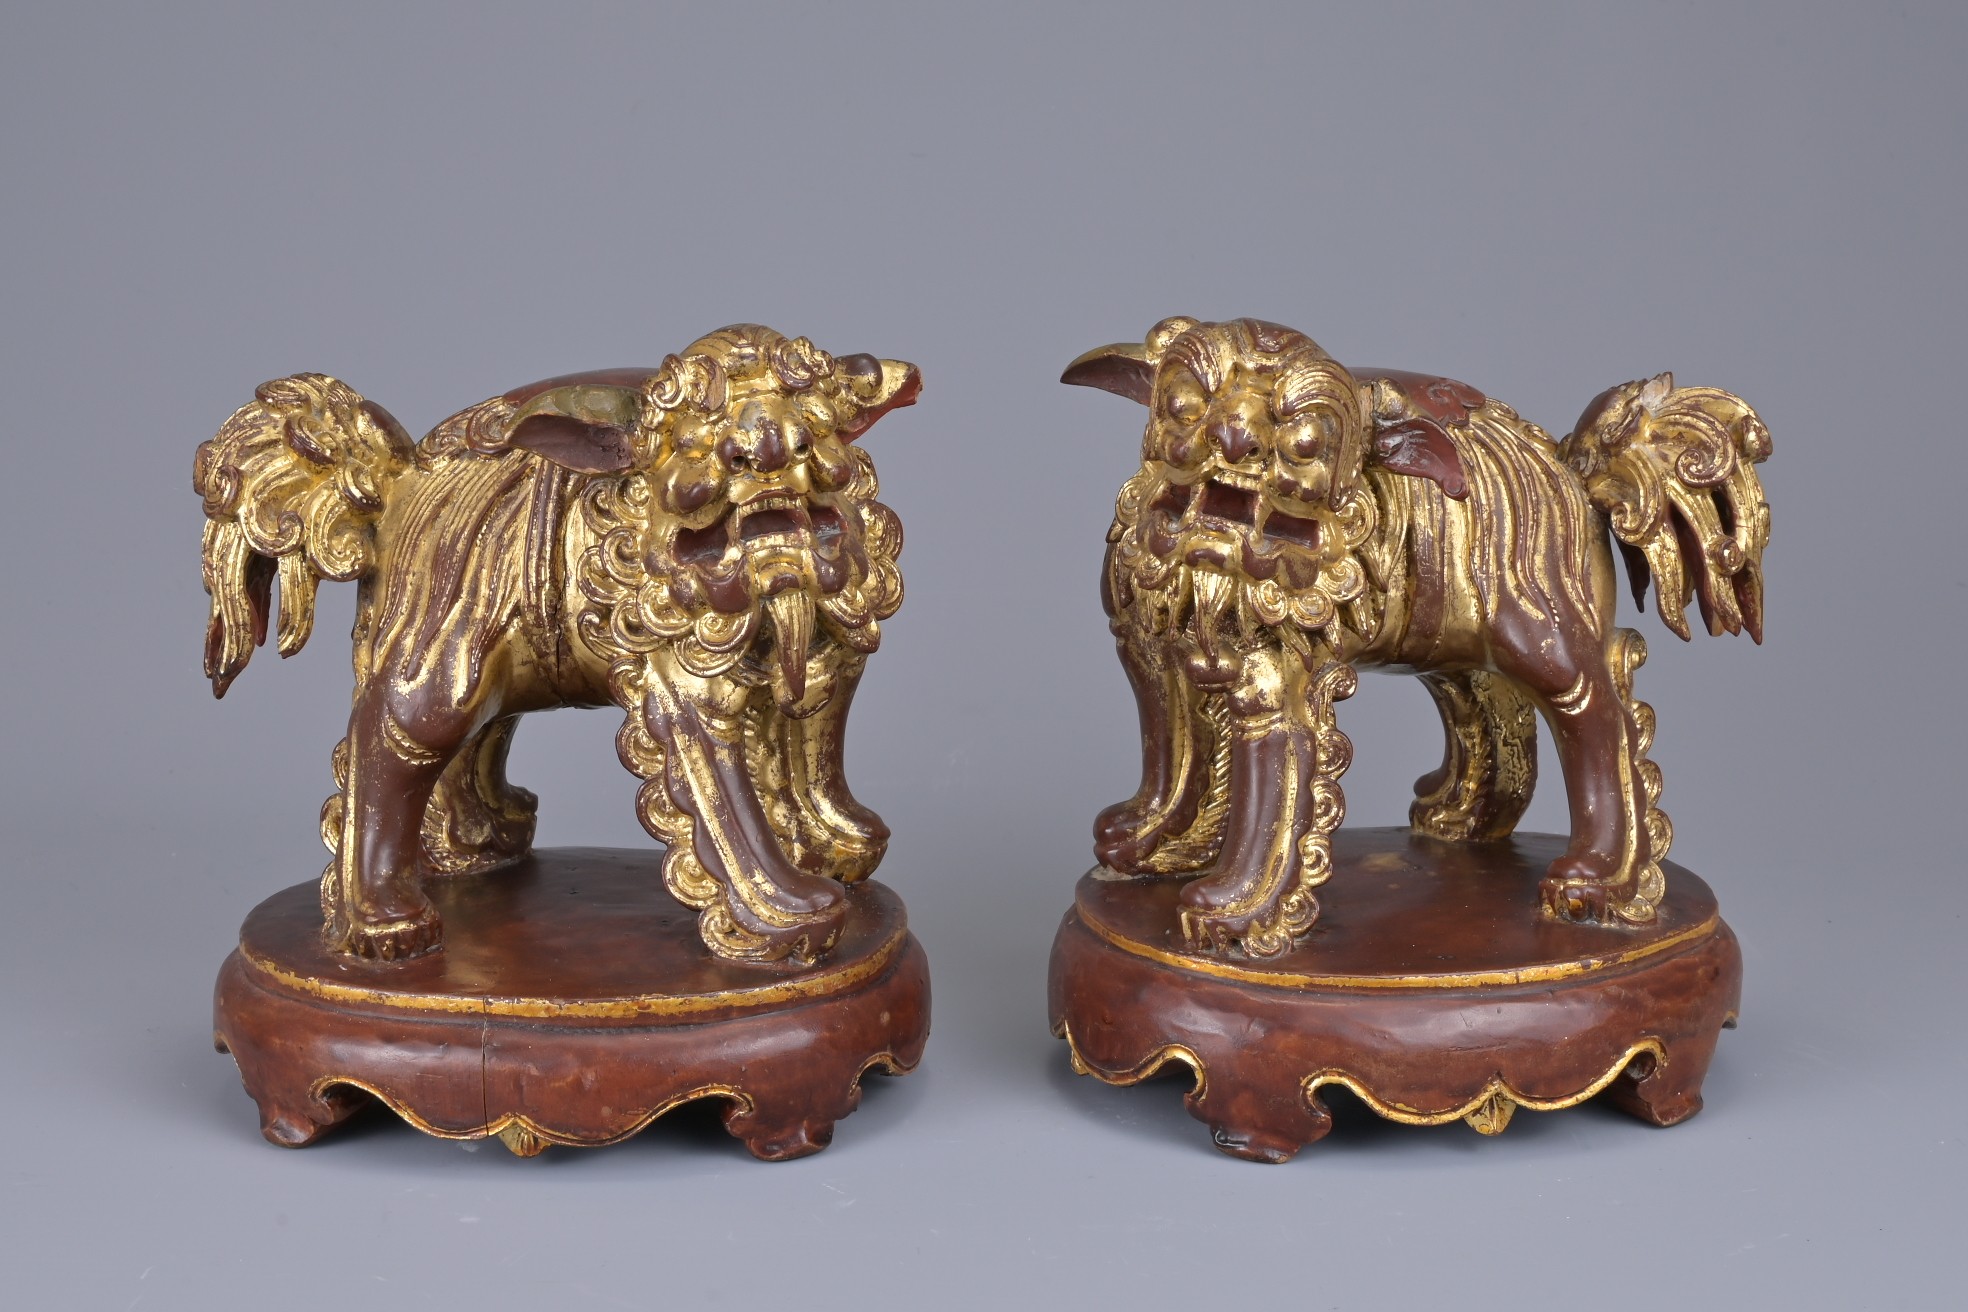 A PAIR OF CHINESE CARVED WOOD GILT LACQUERED LIONS. Standing fiercely with bushy tail. Ruyi head